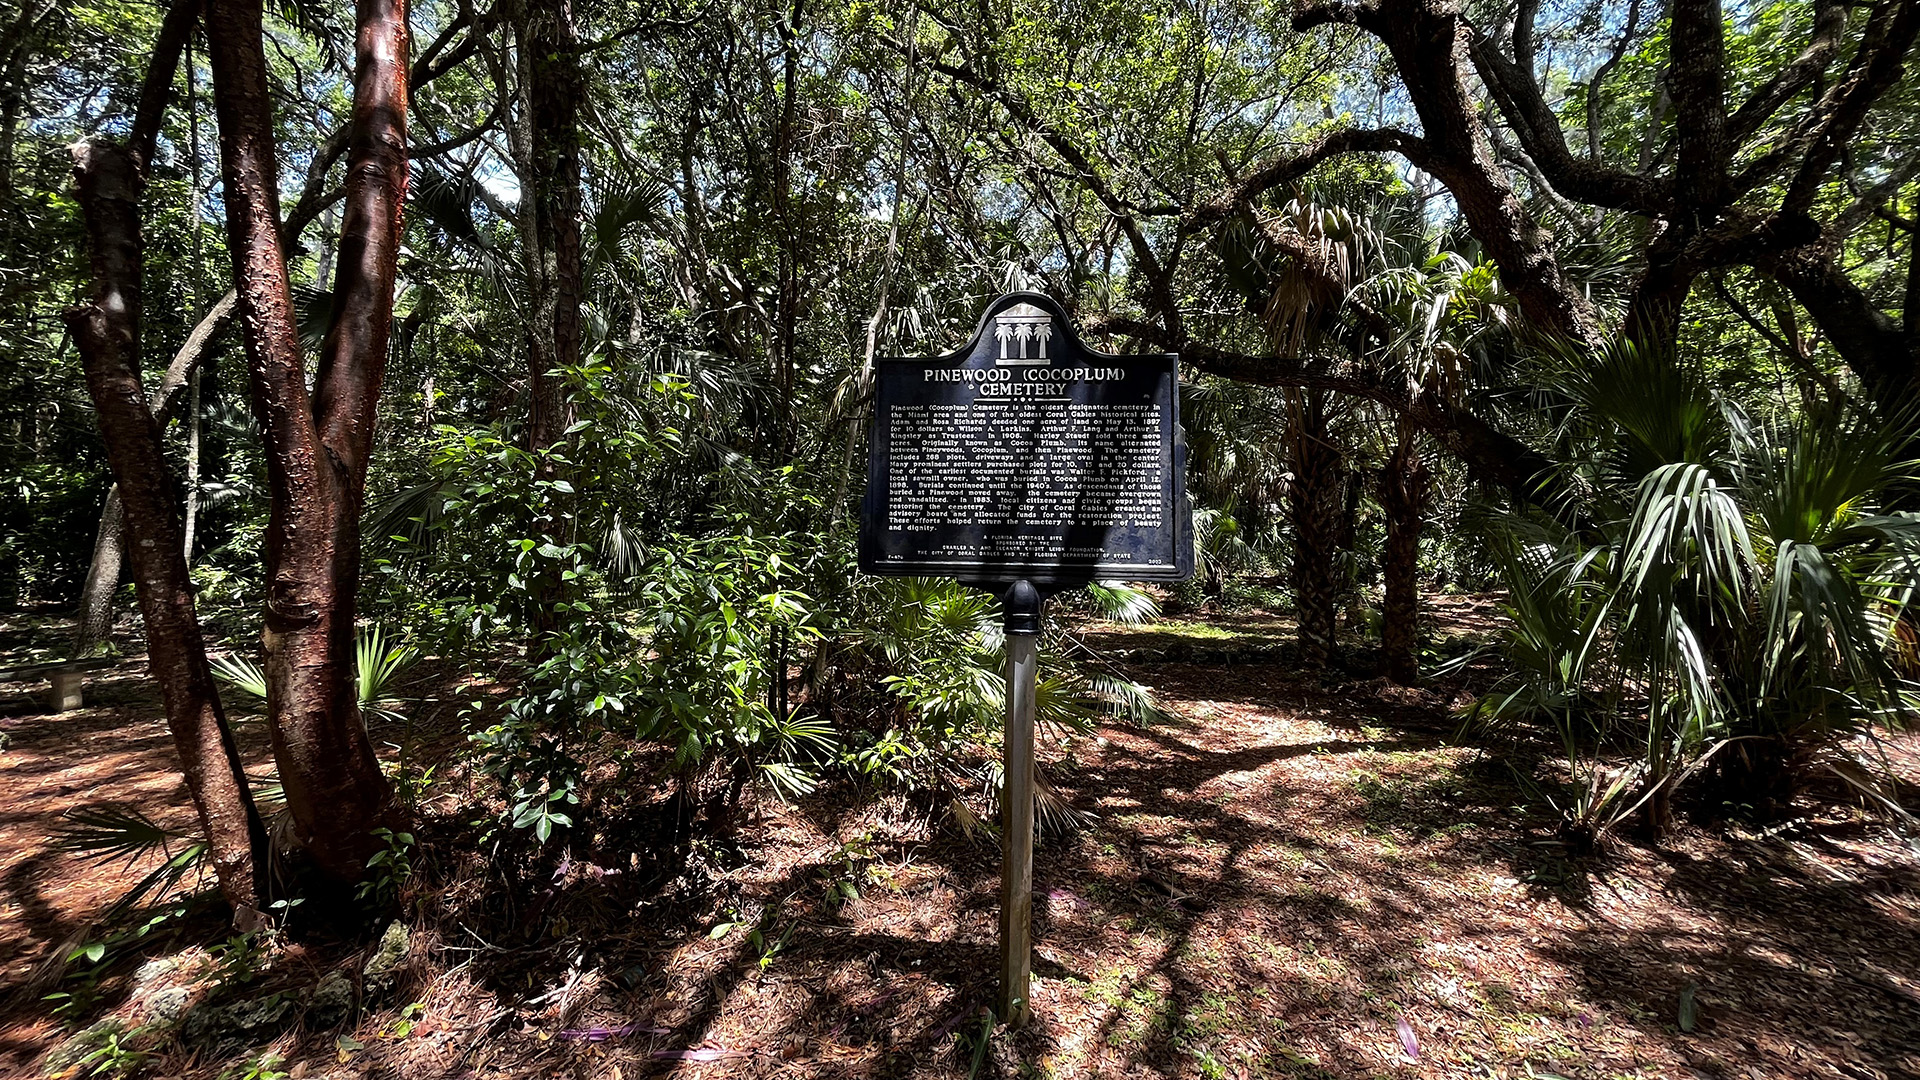 View of a tree covered cemetery with mulch covering the ground. A black historical marker with the words "Pinewood (Cocoplum) Cemetery)" stands in the center.